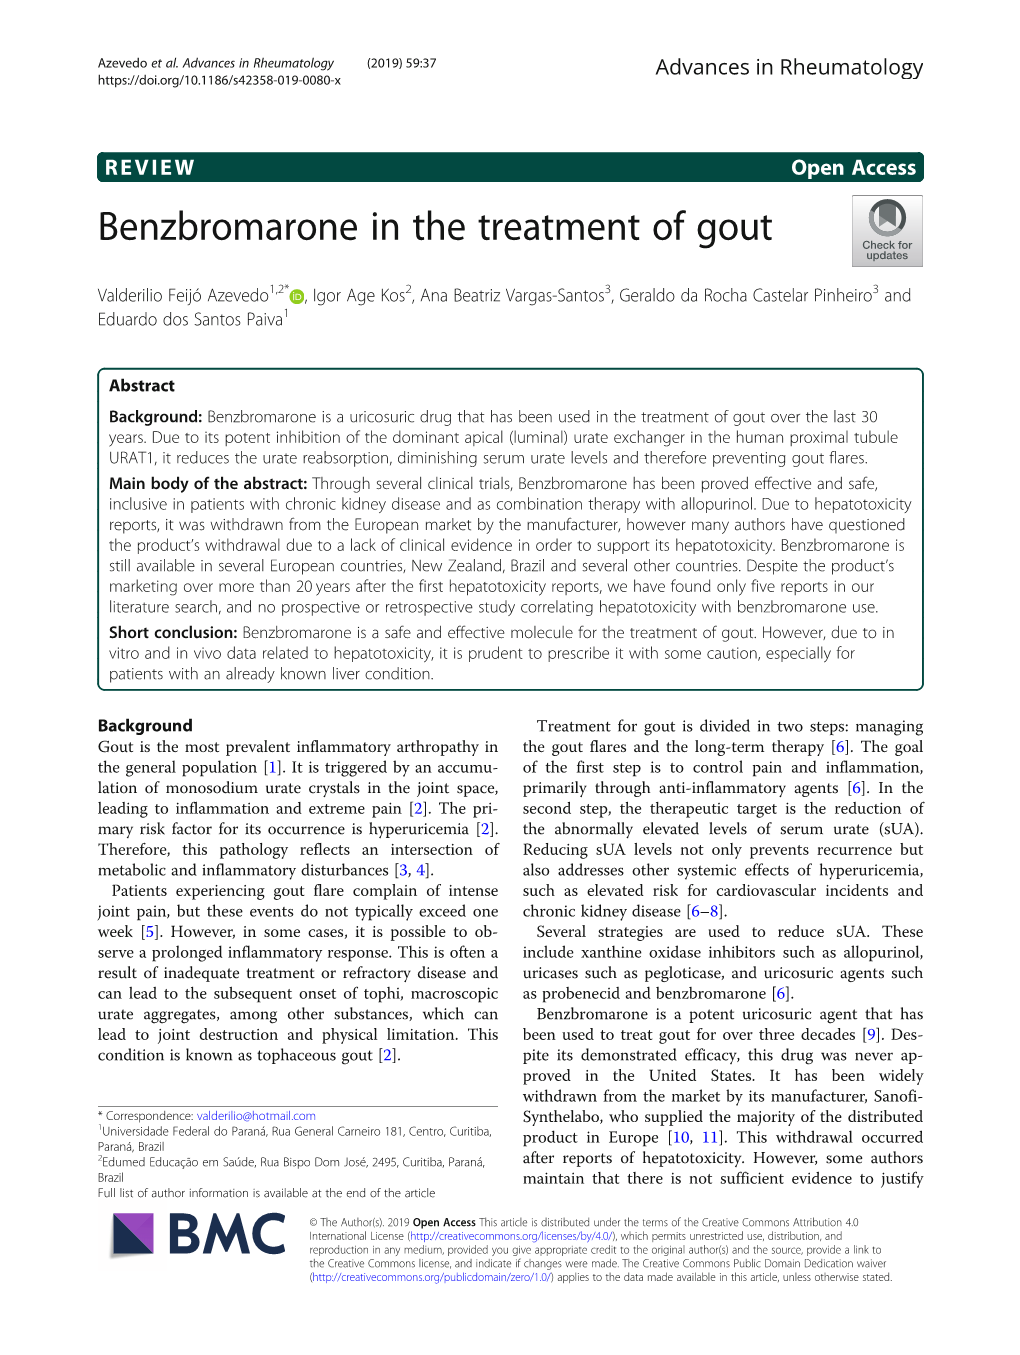 Benzbromarone in the Treatment of Gout